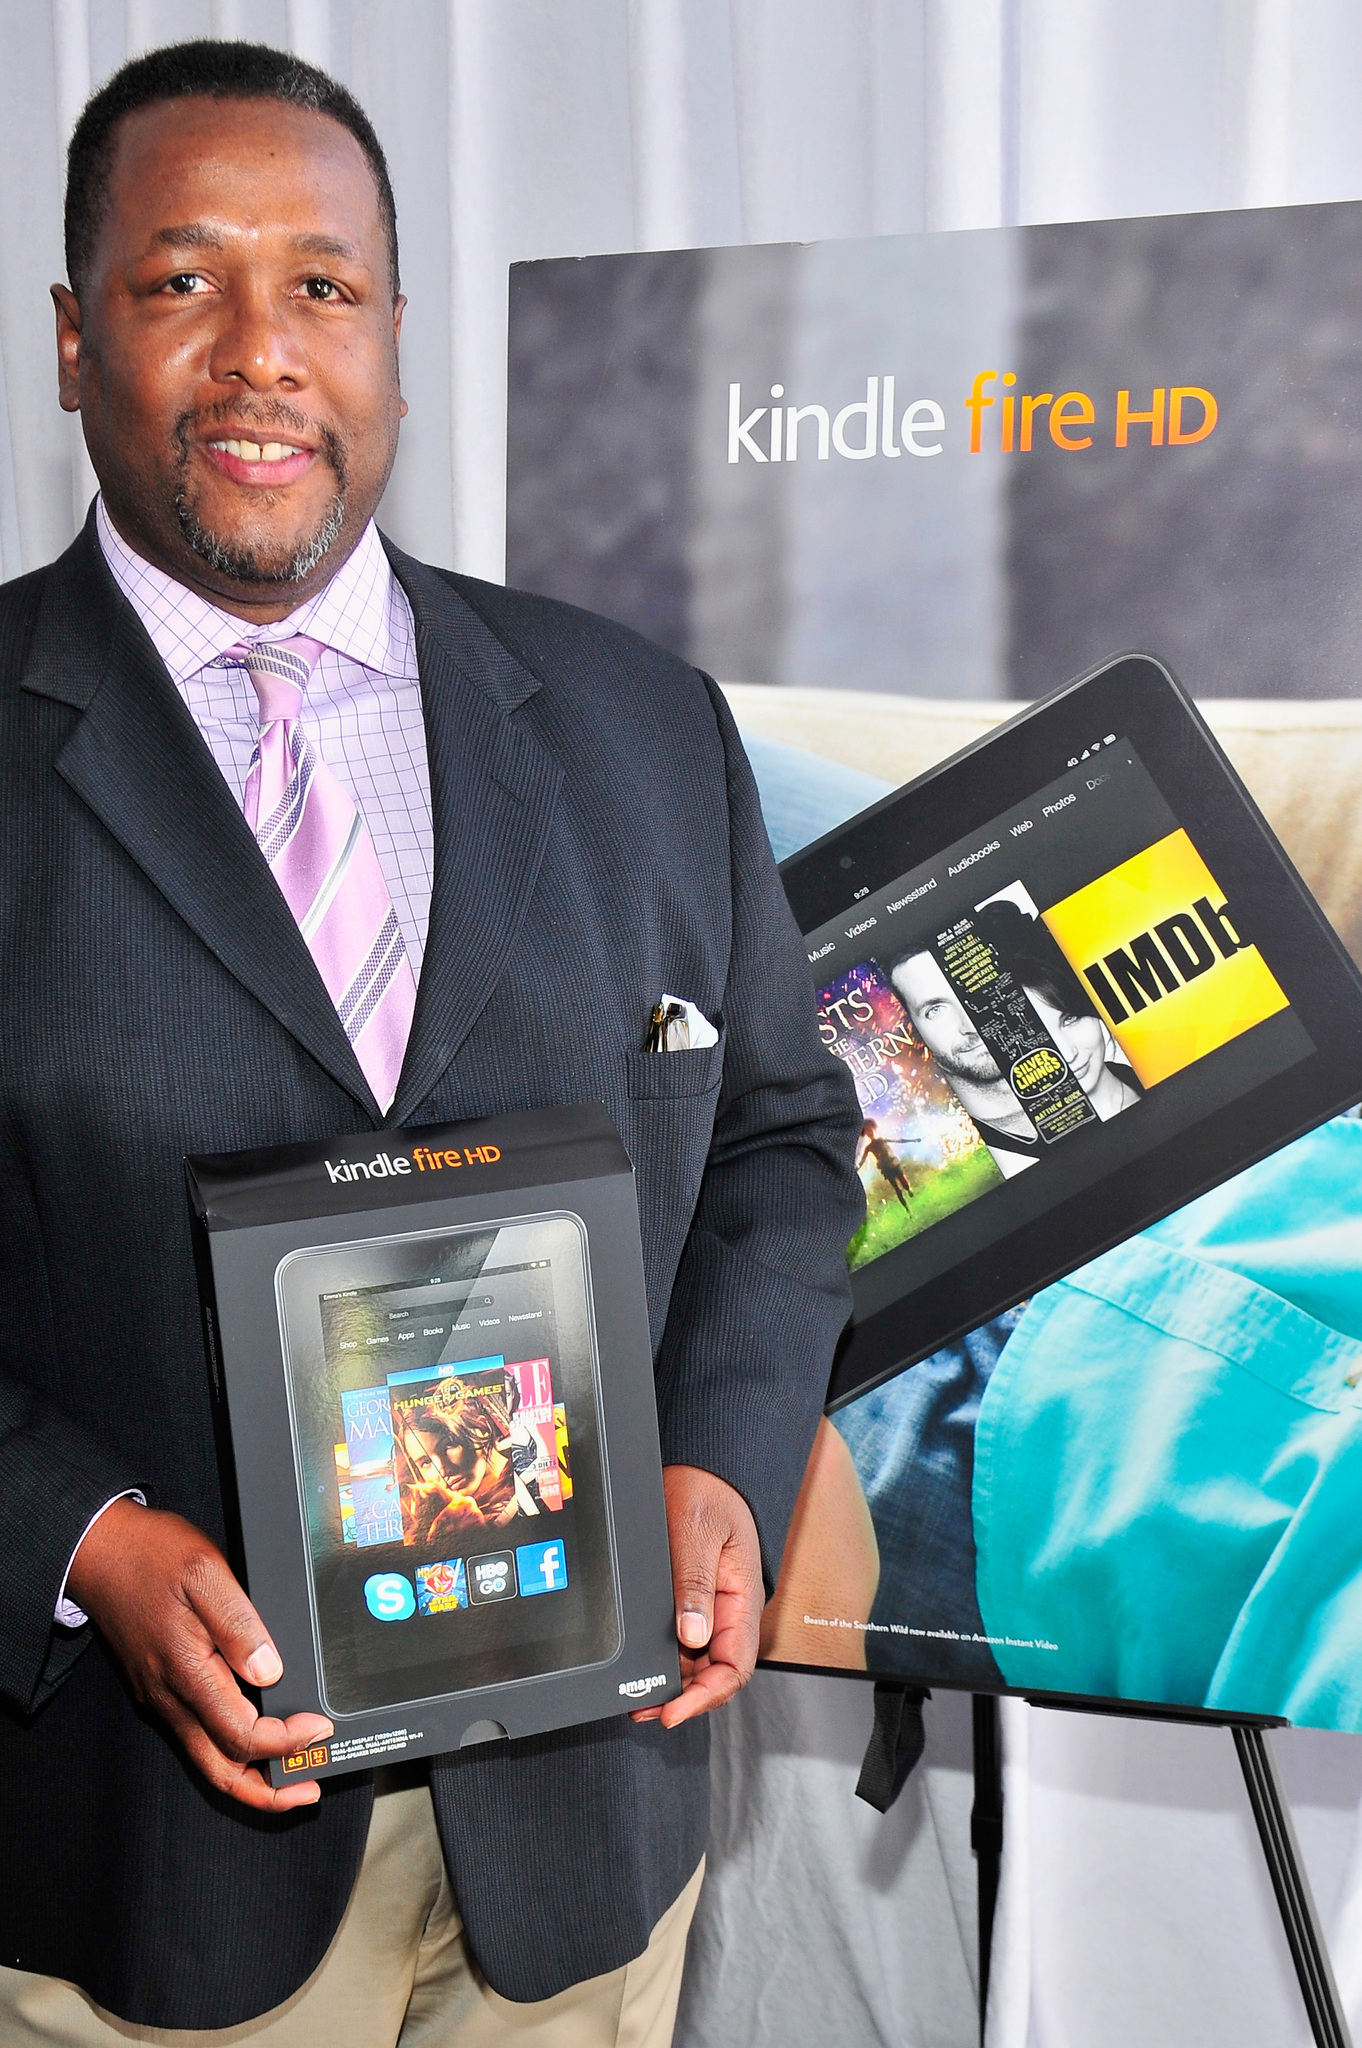 Wendell Pierce poses in the Kindle Fire HD and IMDb Green Room during the 2013 Film Independent Spirit Awards at Santa Monica Beach on February 23, 2013 in Santa Monica, California.